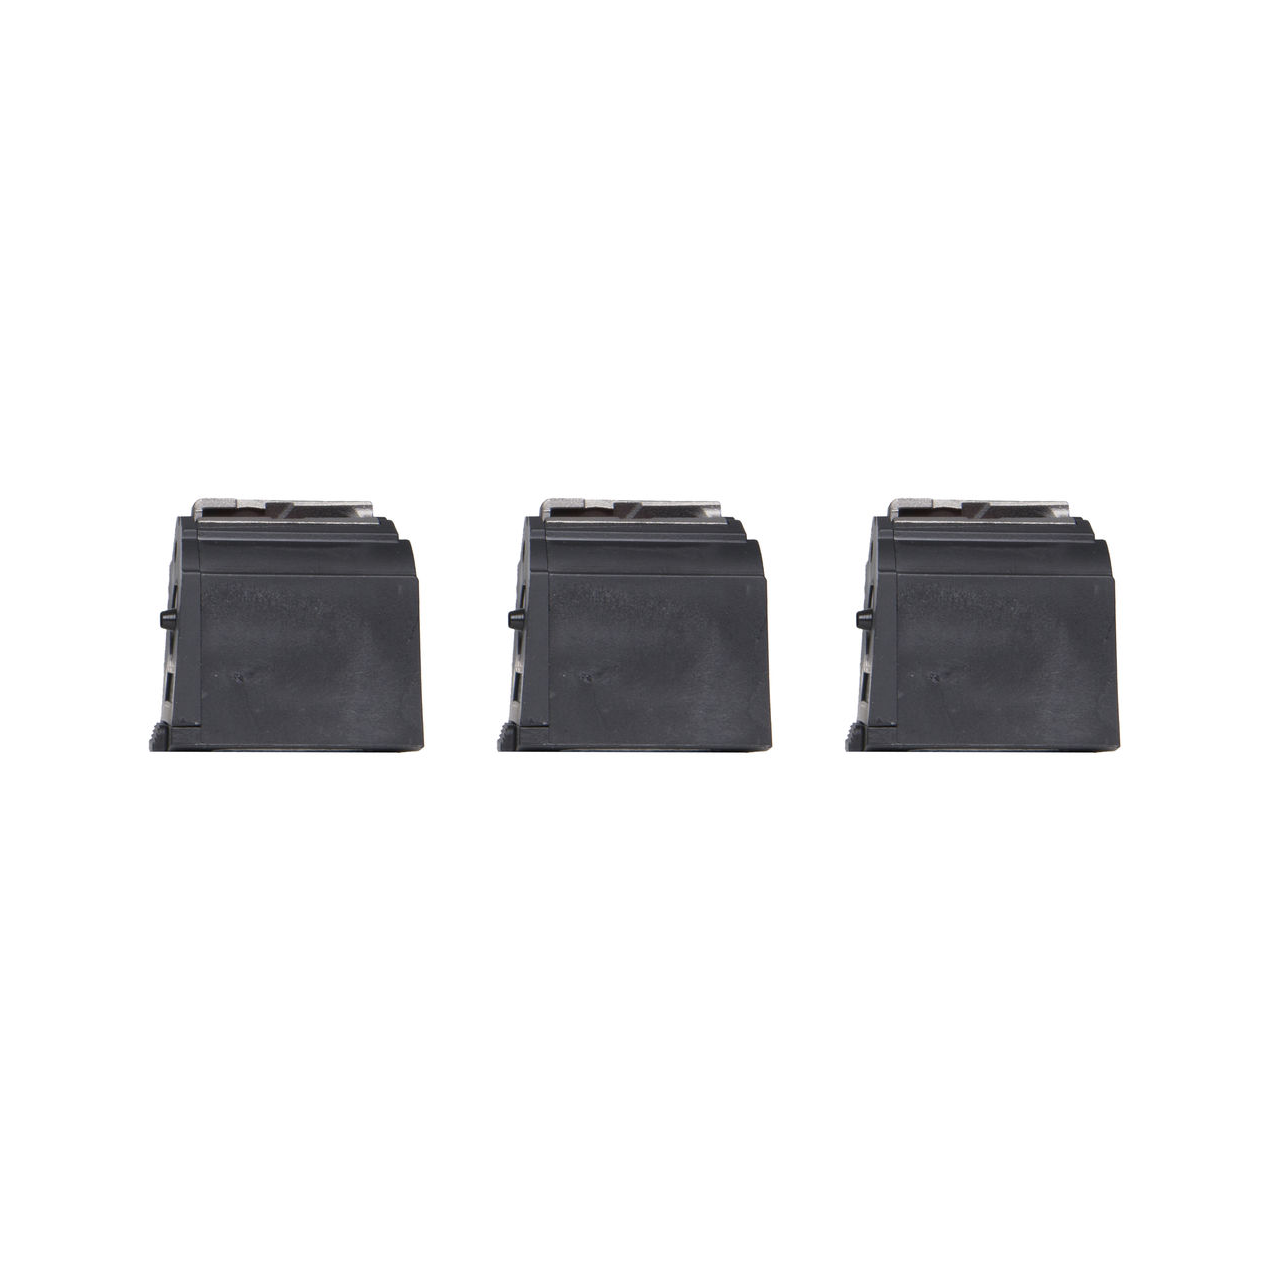 RUGER 10/22 22 LR 10 ROUND MAGAZINE PACKAGE OF 3 90451